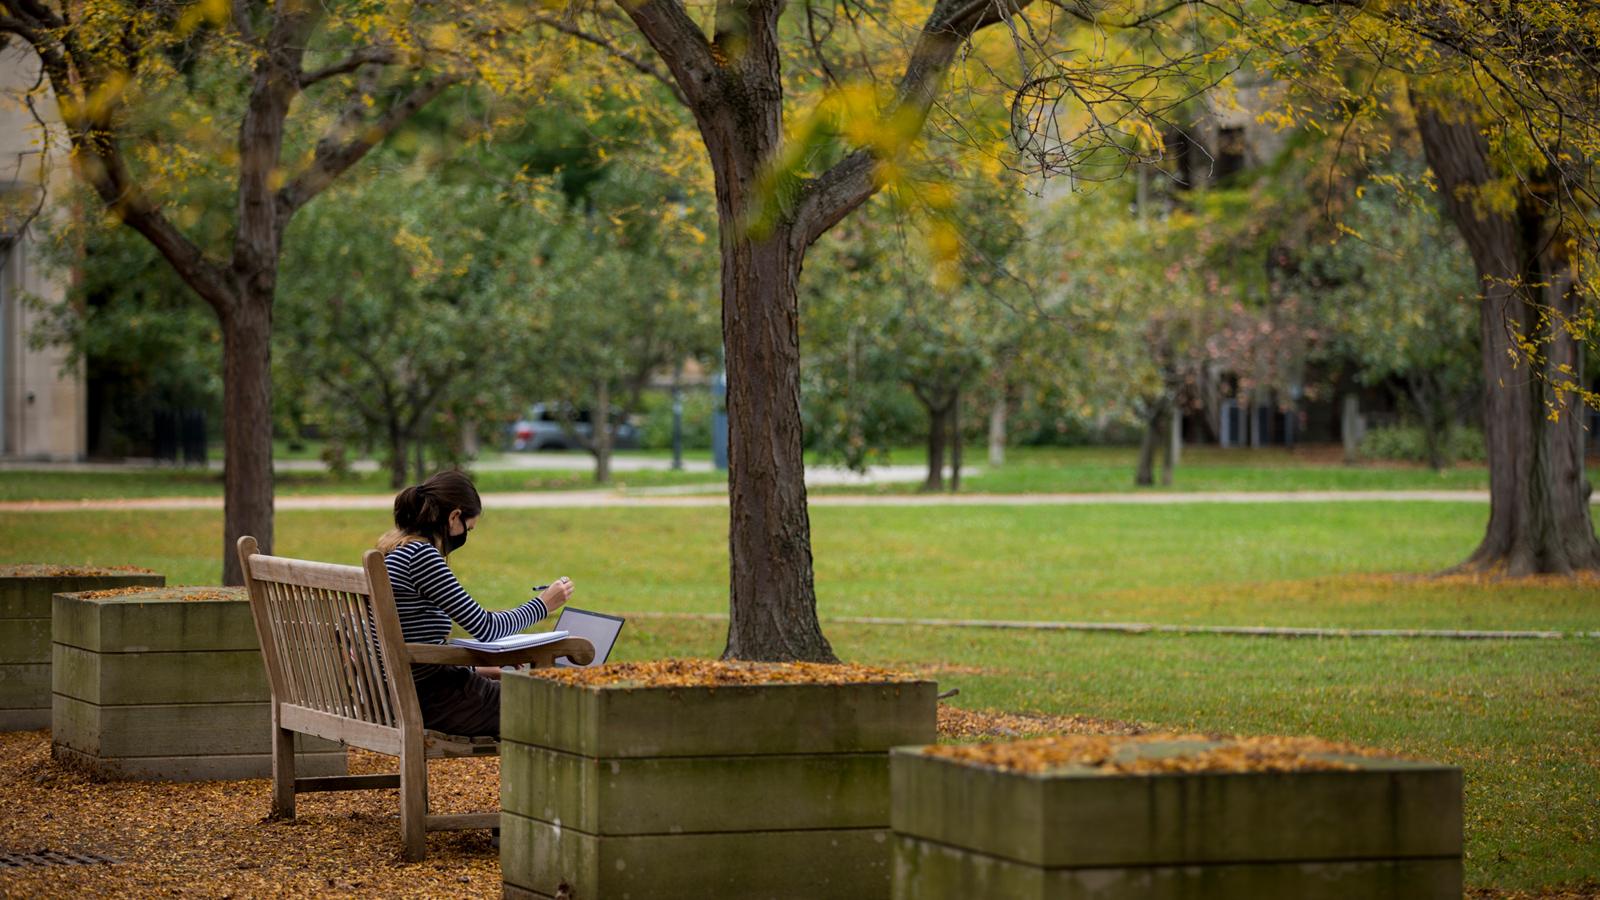 Campus scene with trees, grass, and a lone student on a bench reading.